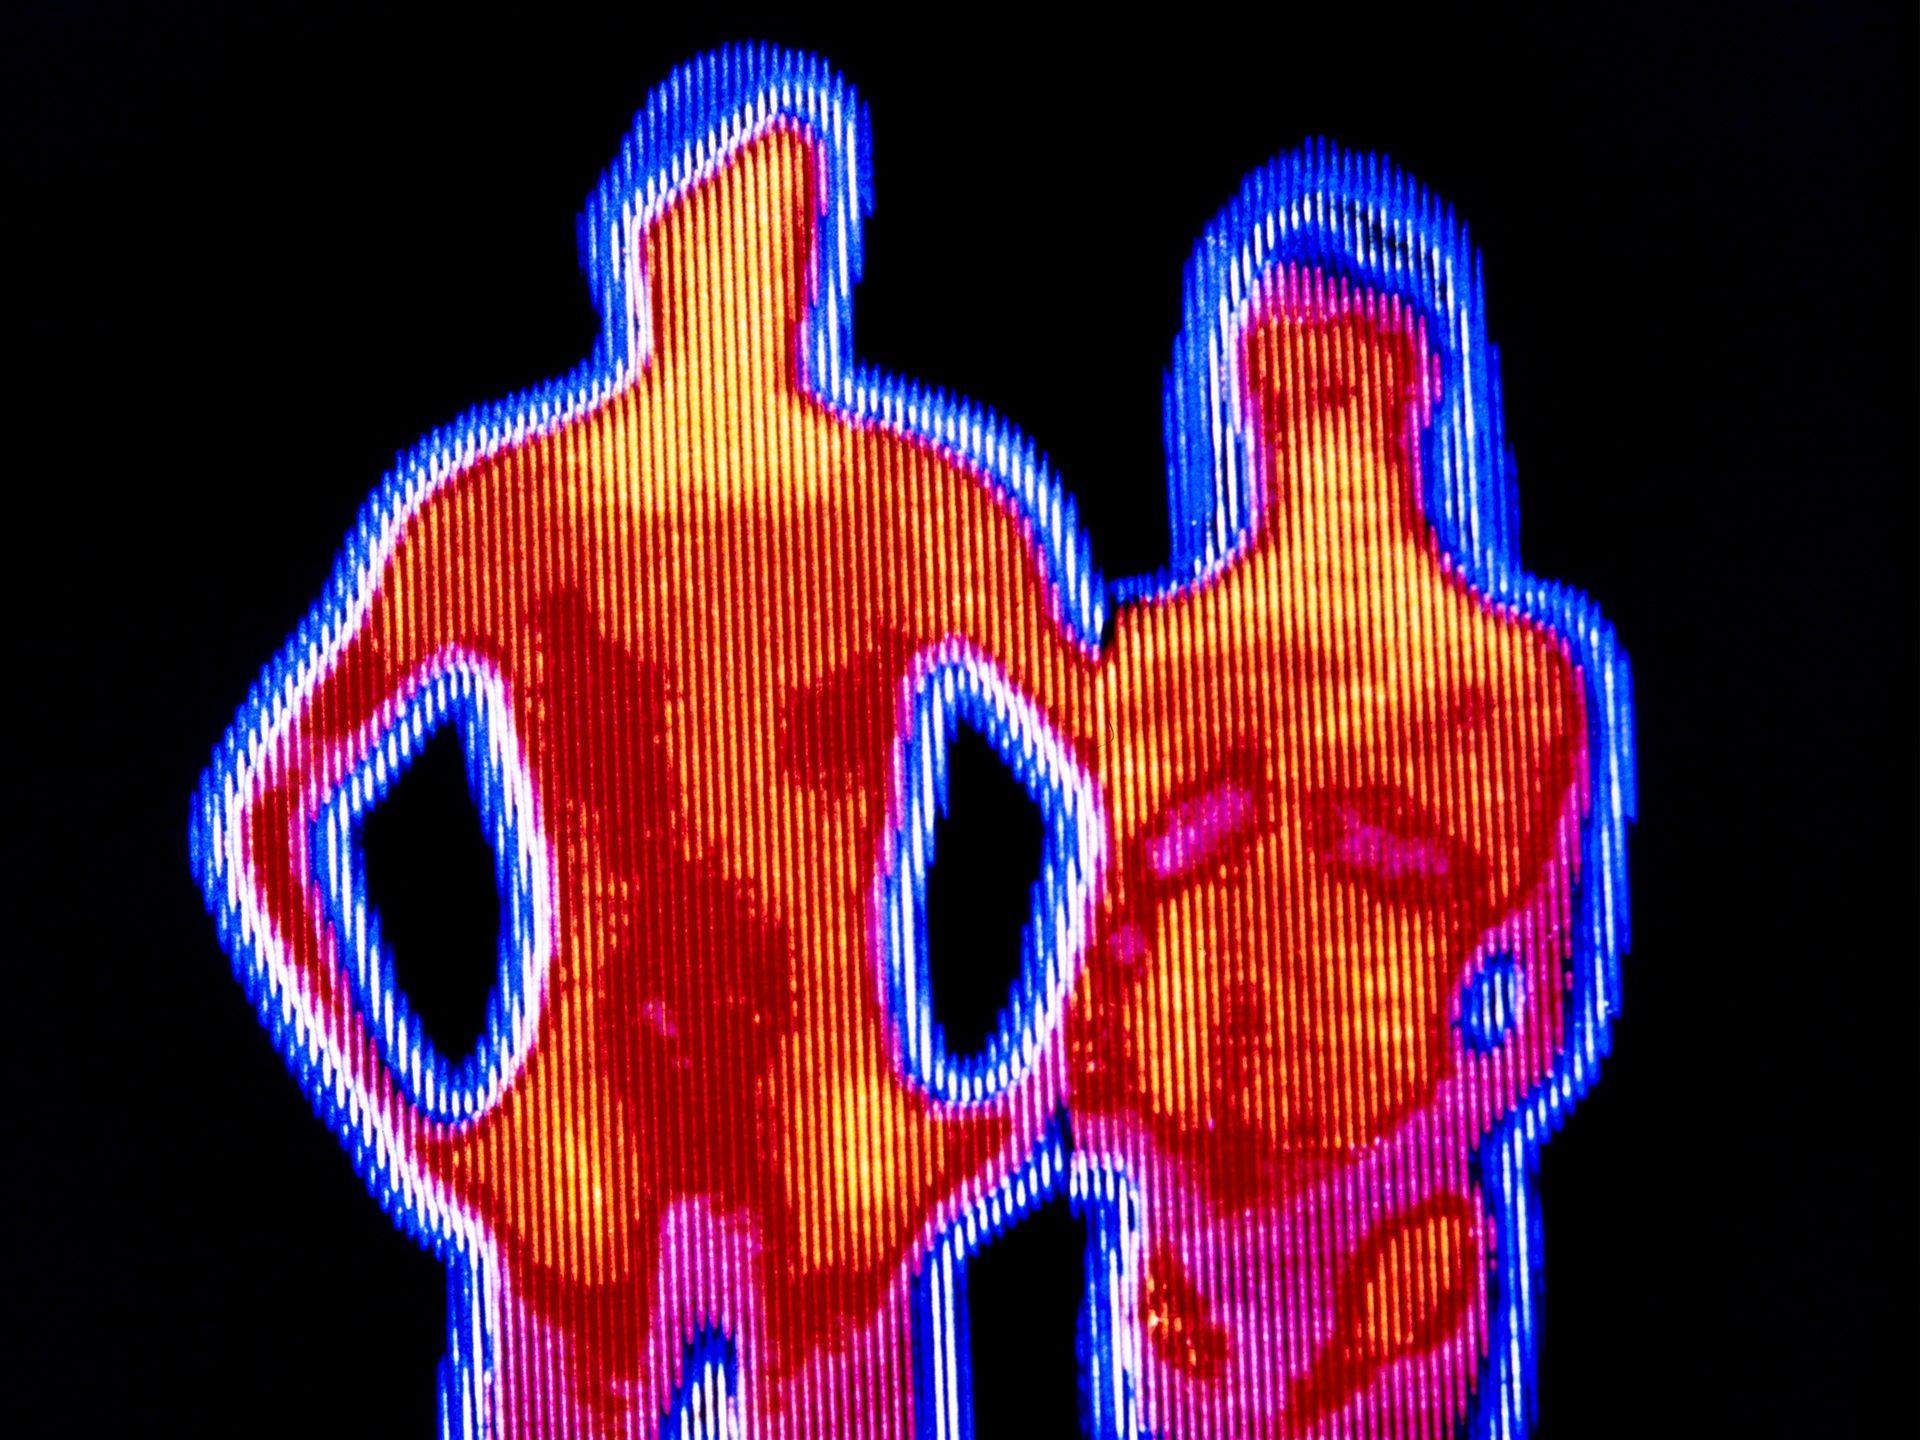 What If We Had Thermal Vision?. Art, Psychedelic art, Art inspiration